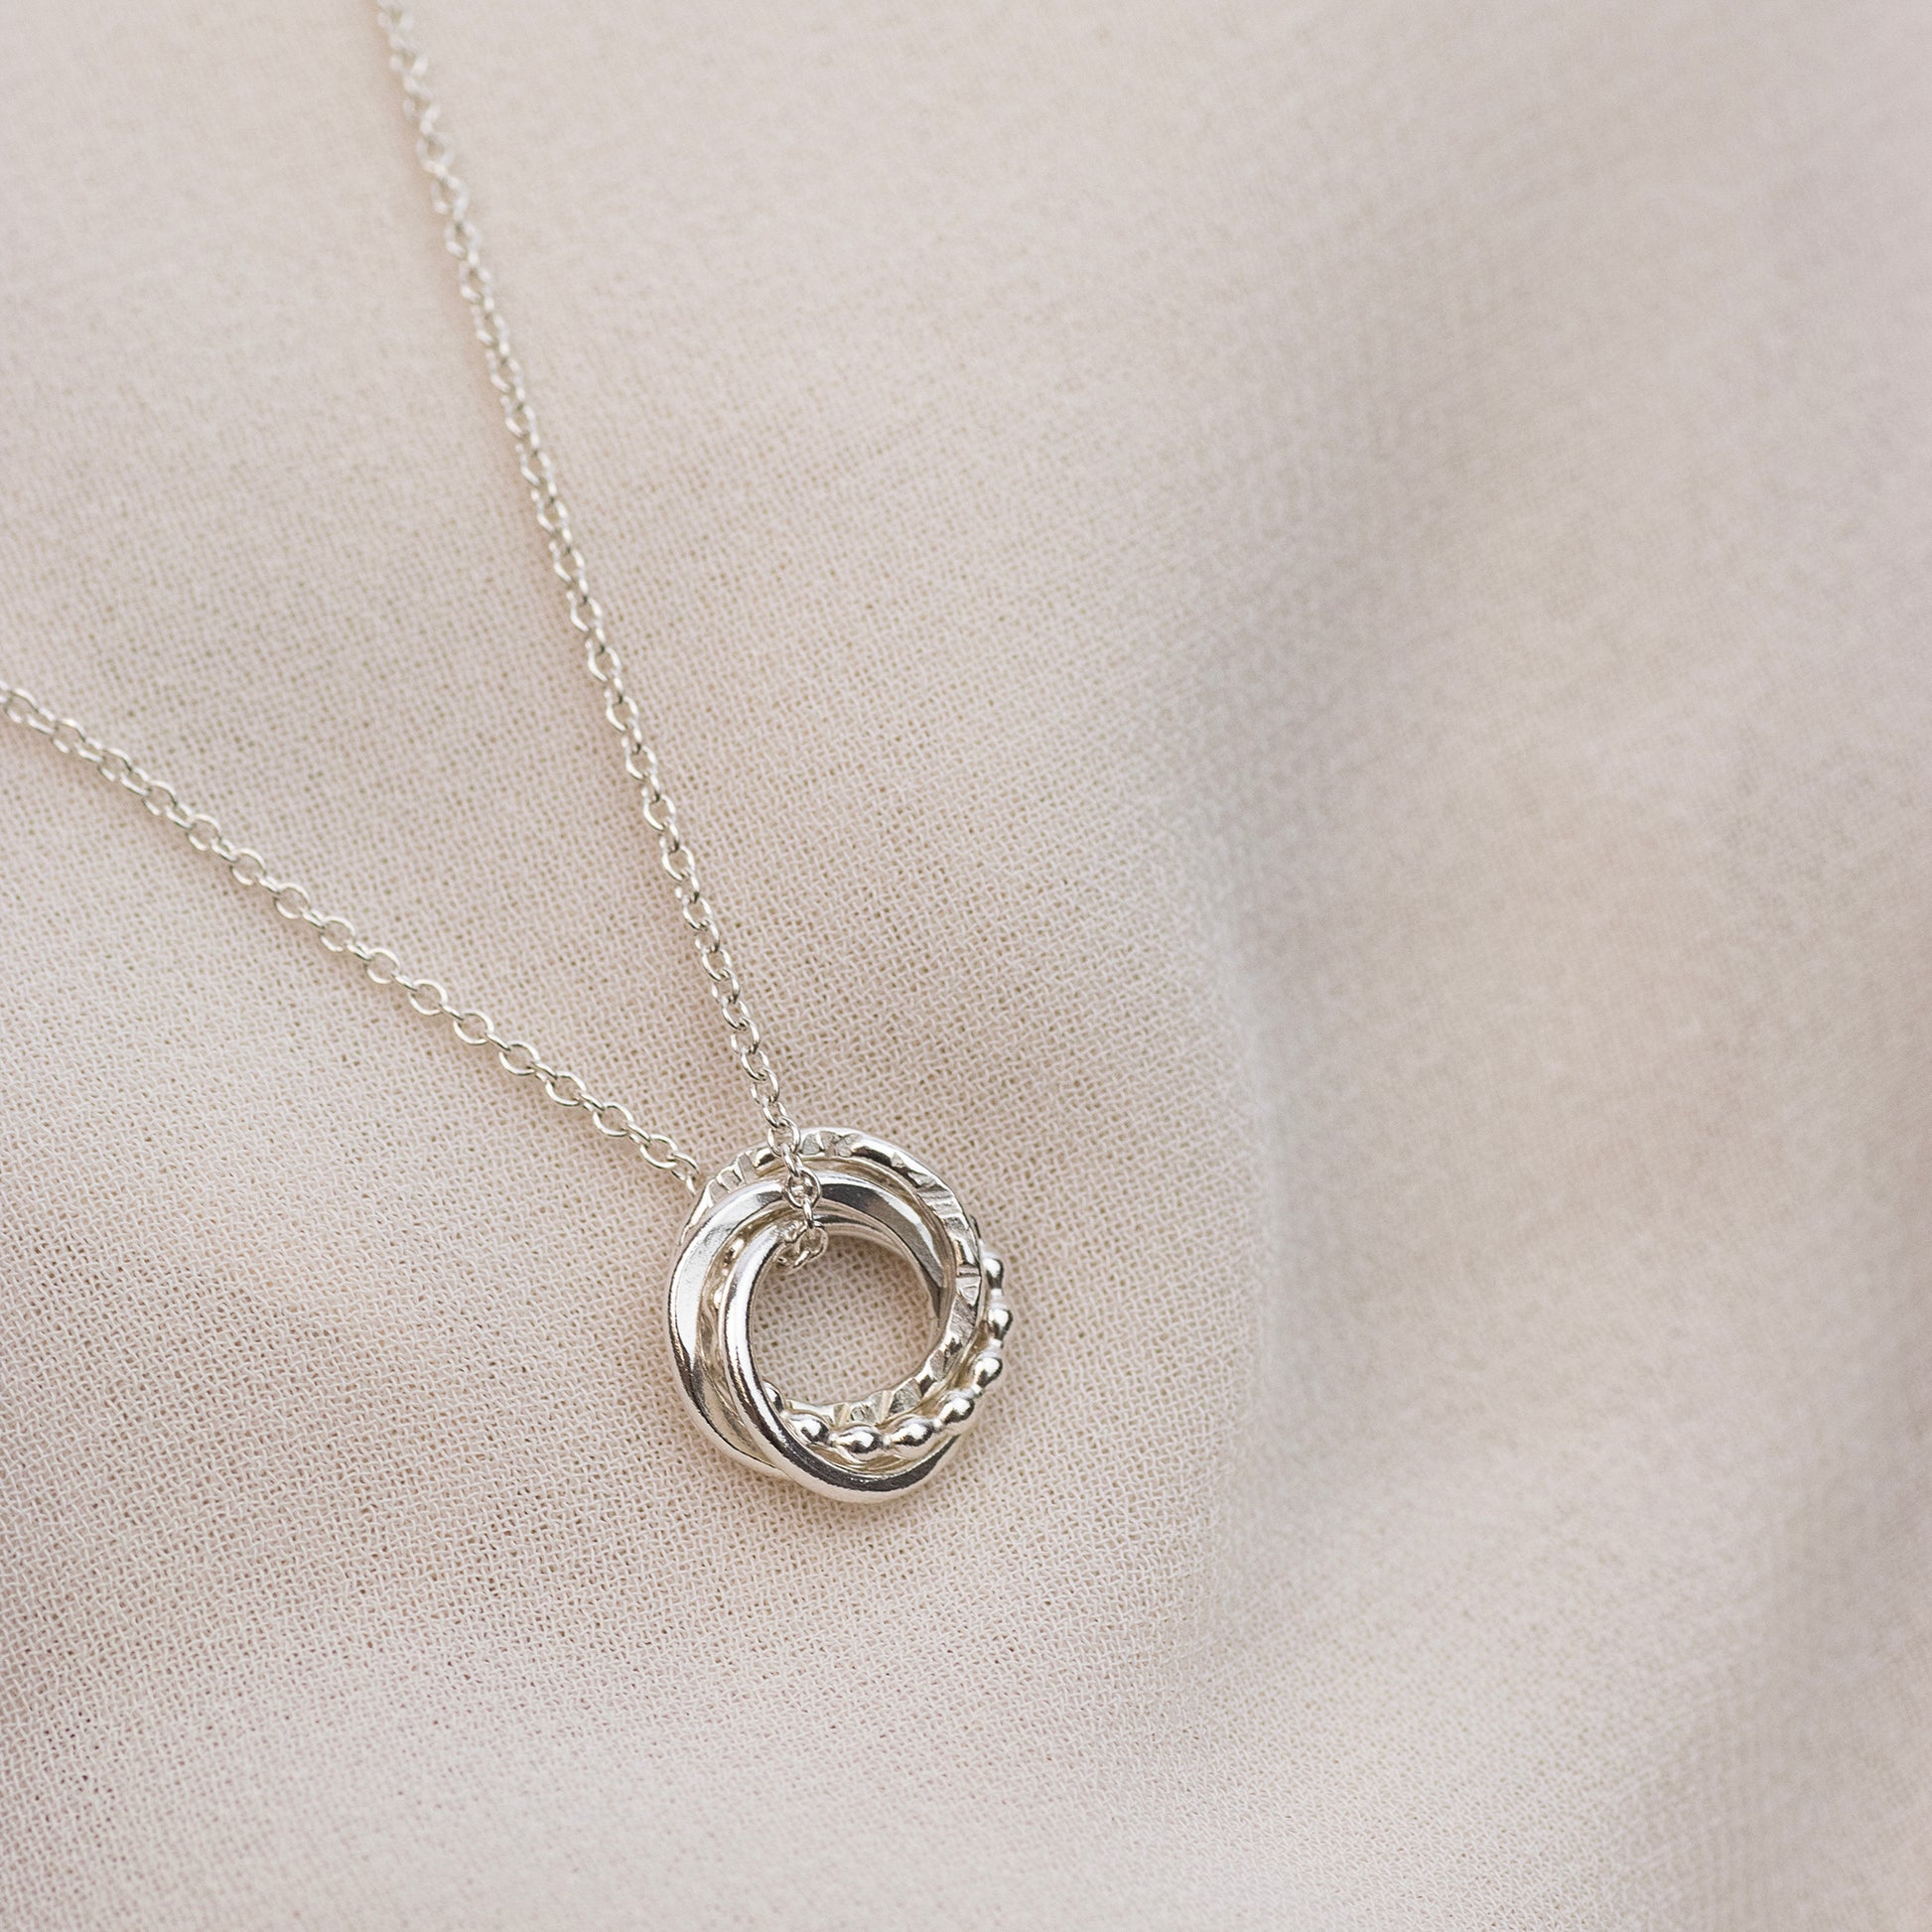 4 Sisters Necklace - Silver Love Knot - Linked for a Lifetime